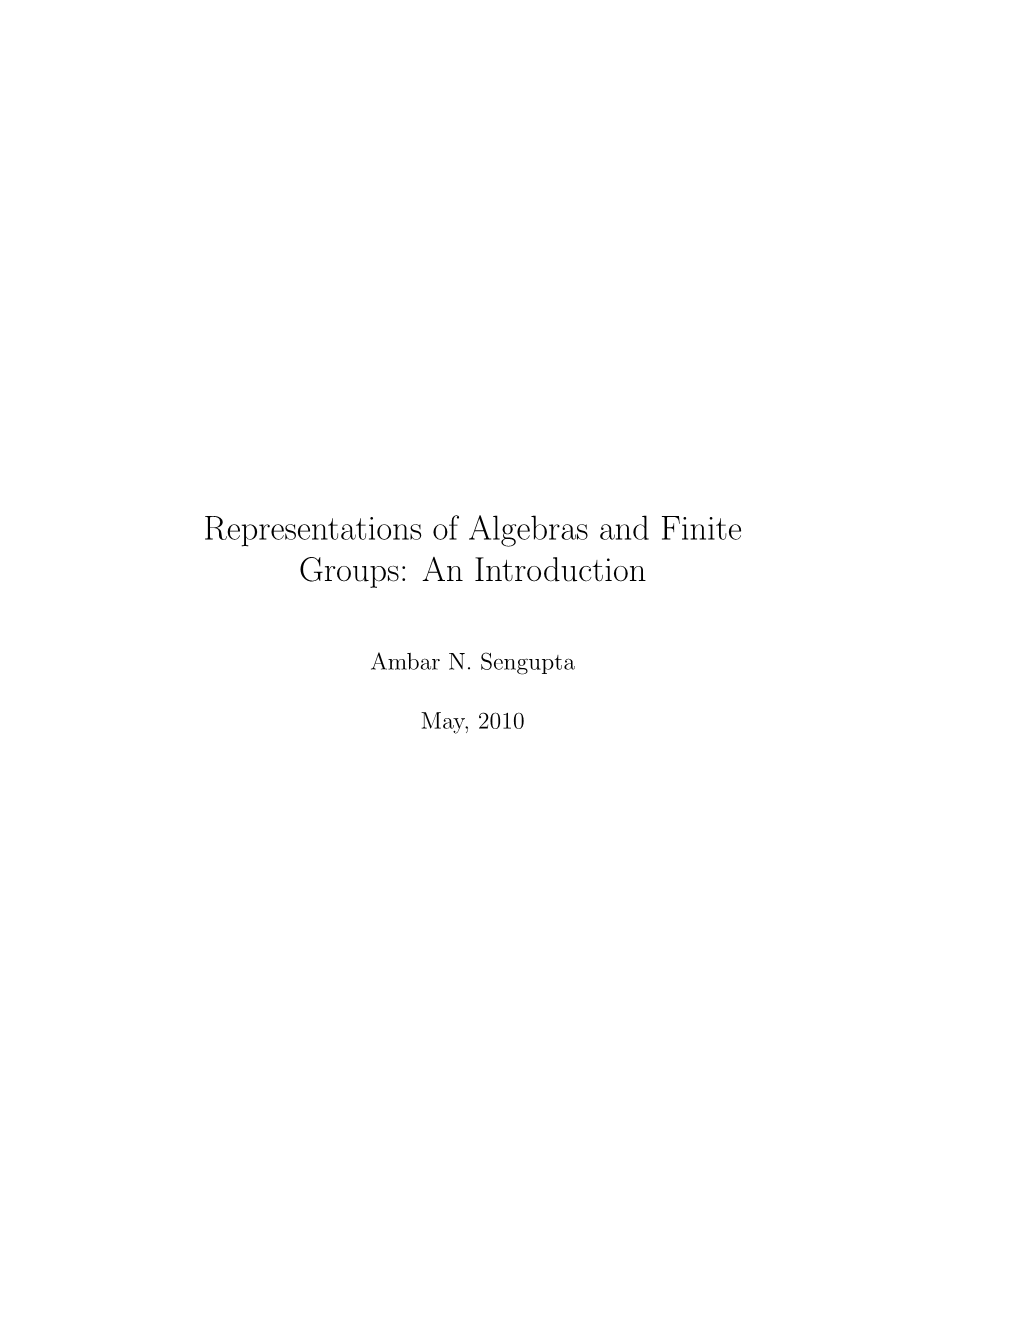 Representations of Algebras and Finite Groups: an Introduction